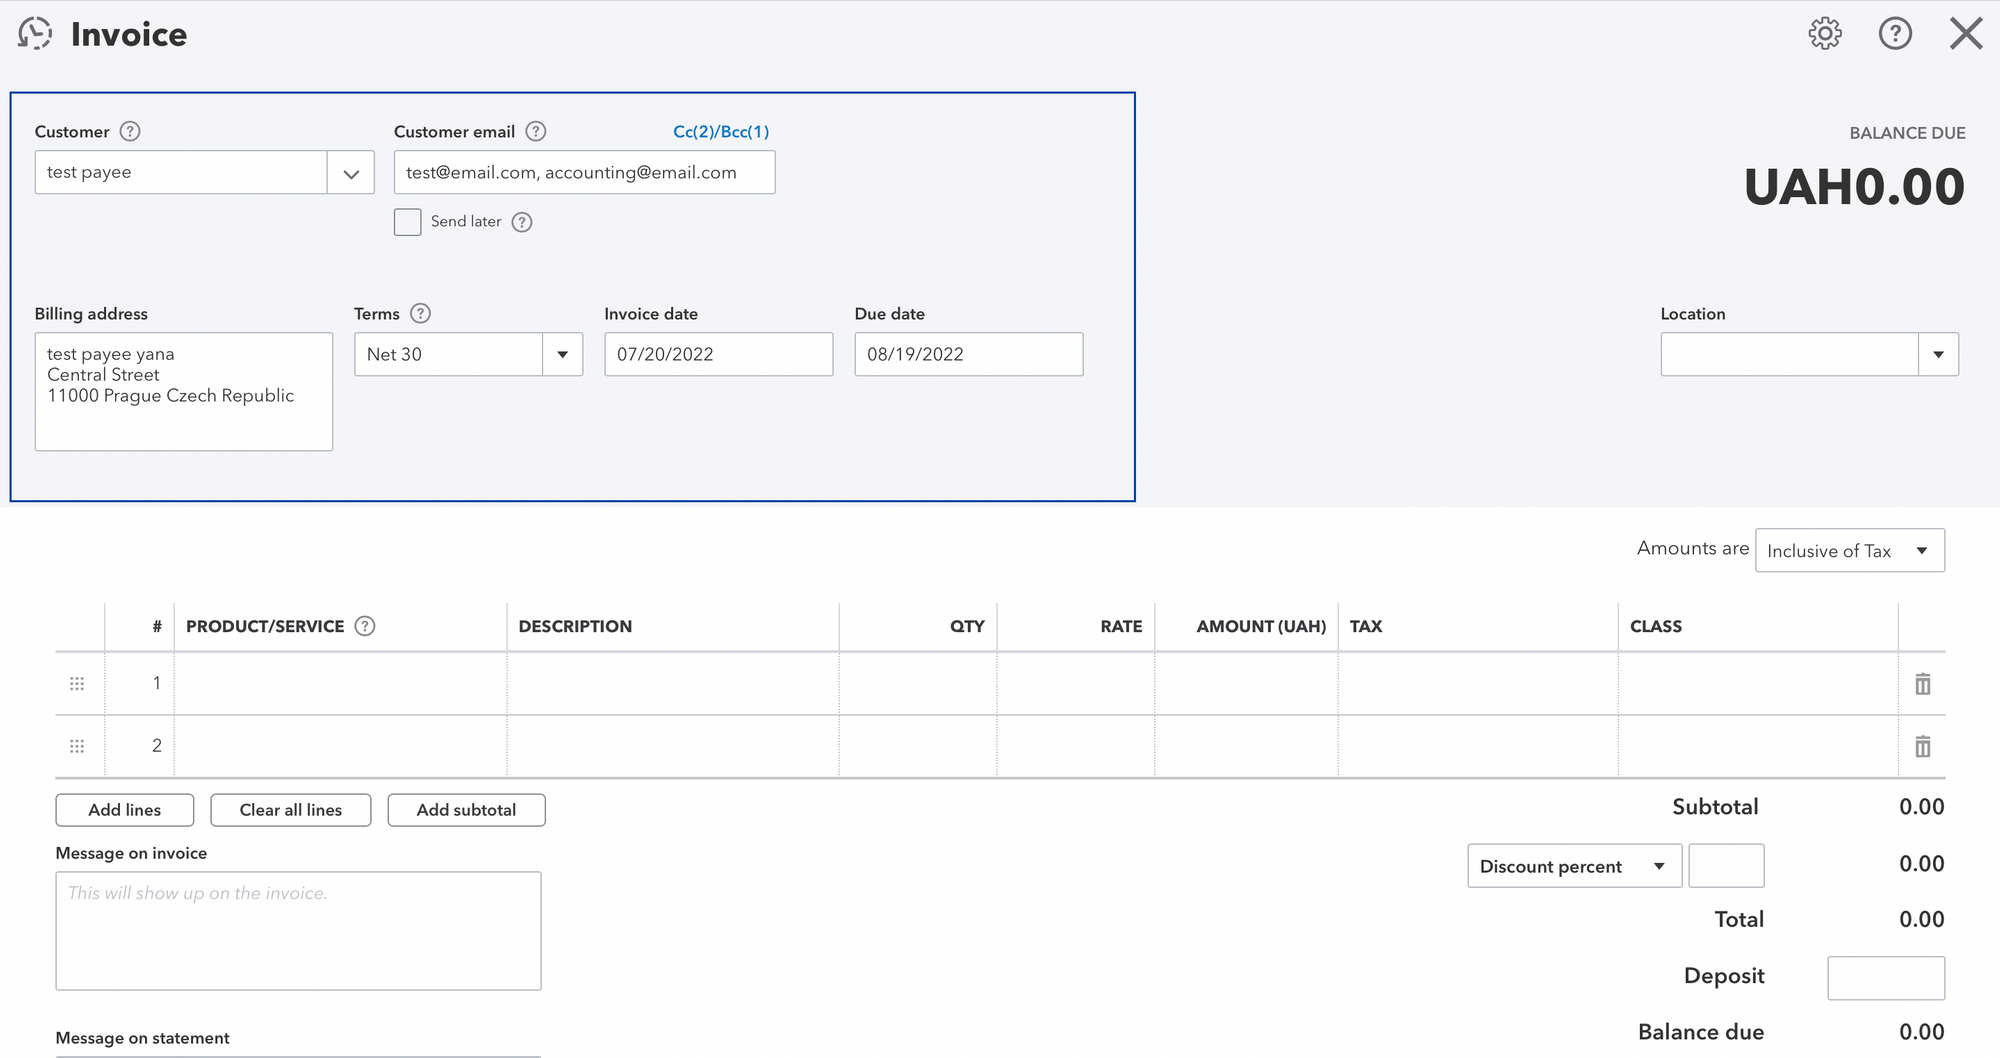 screenshot of filling information about customer and payment terms